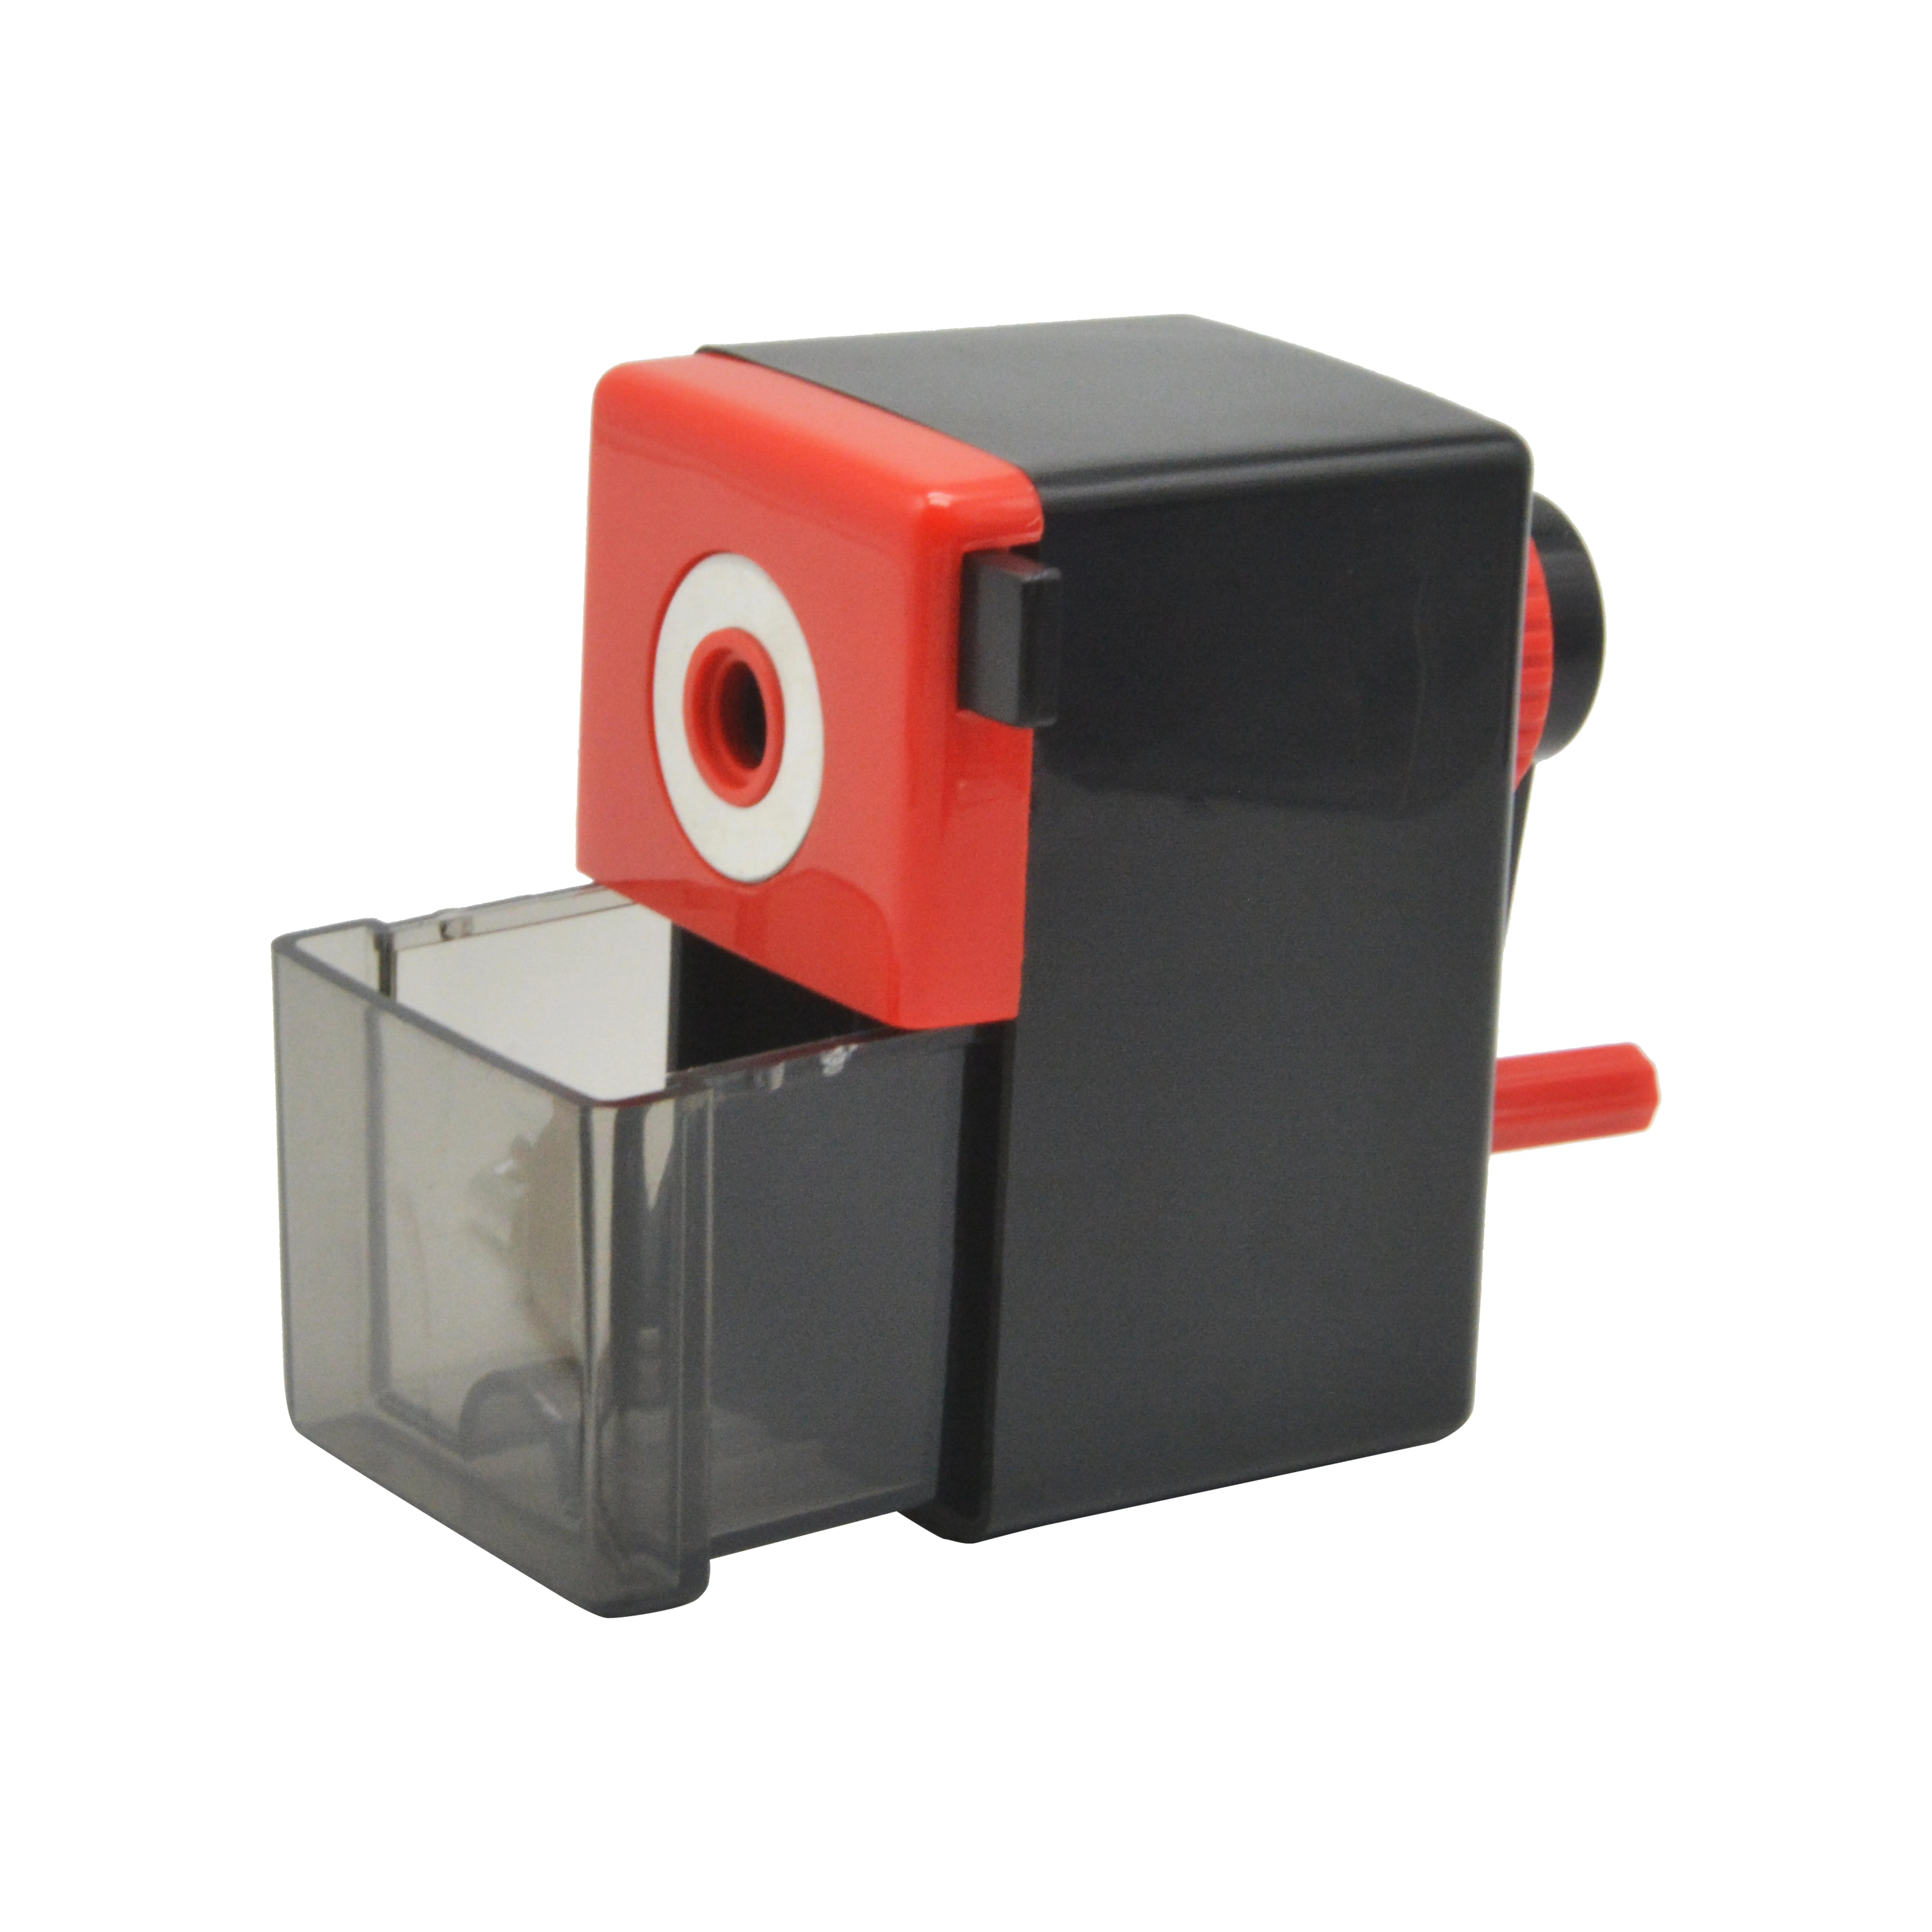 Battery And USB Dual Power Supply Mode High Quality Electric Hob Pencil Sharpener Is Suitable For Students And Office Workers